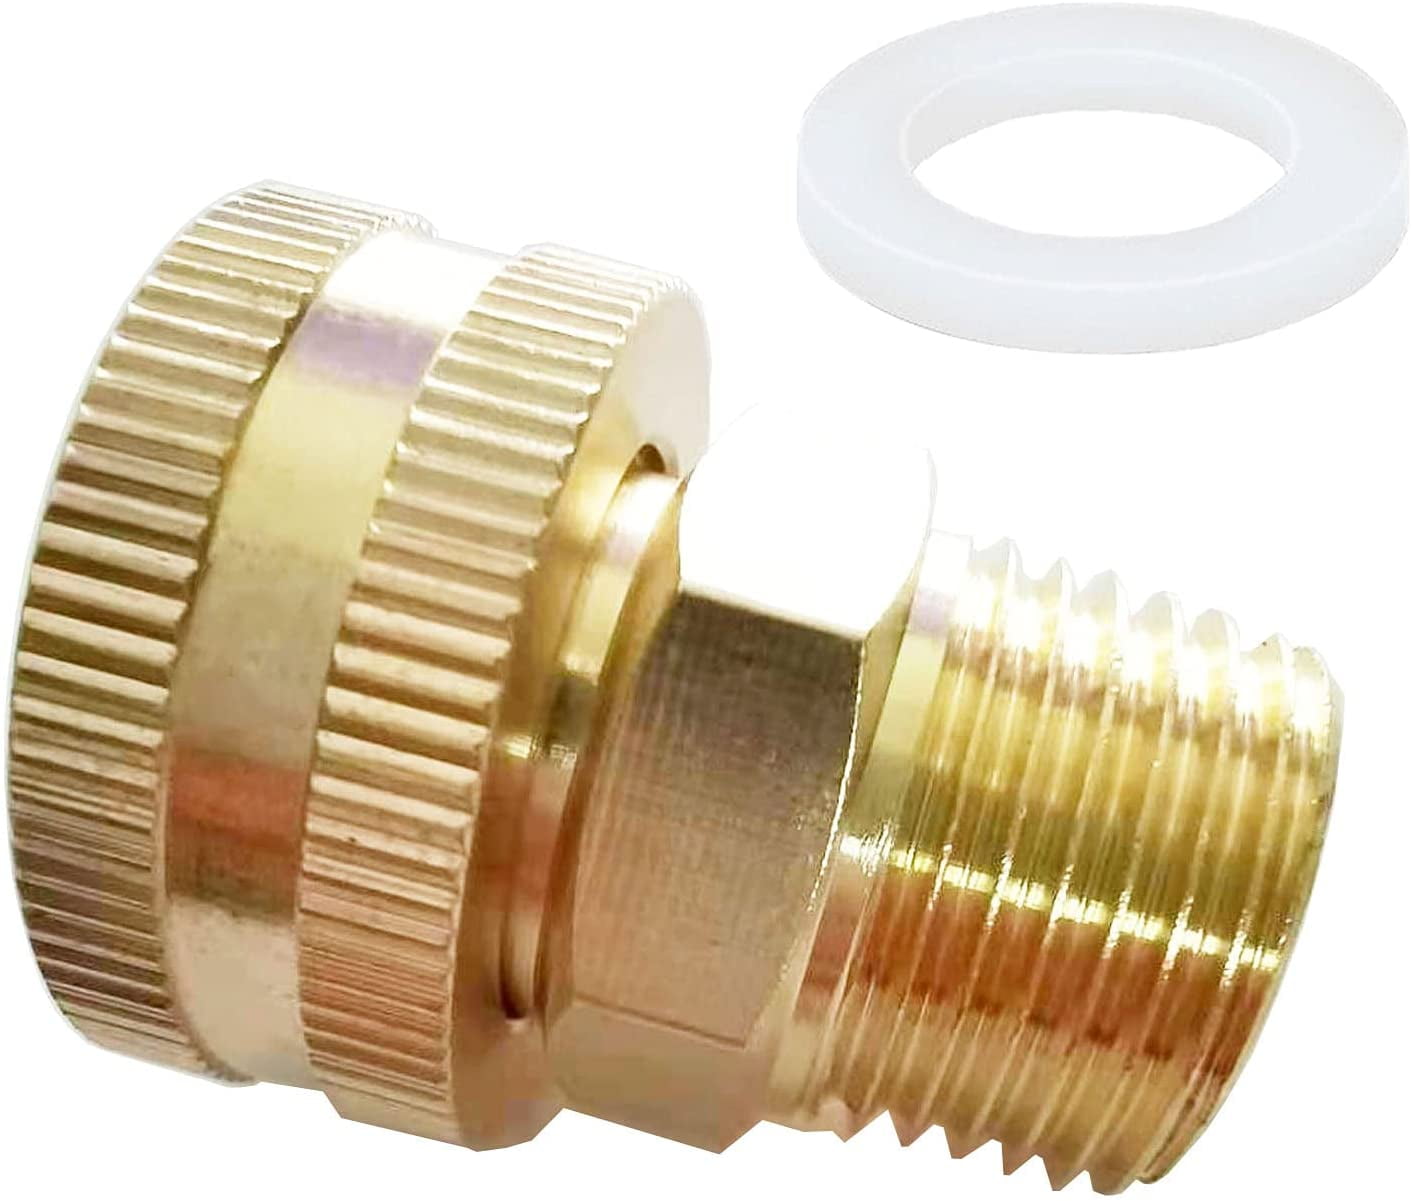 YOUHO Brass Swivel 3/4” GHT Female x 1/2” NPT Male Connector, GHT